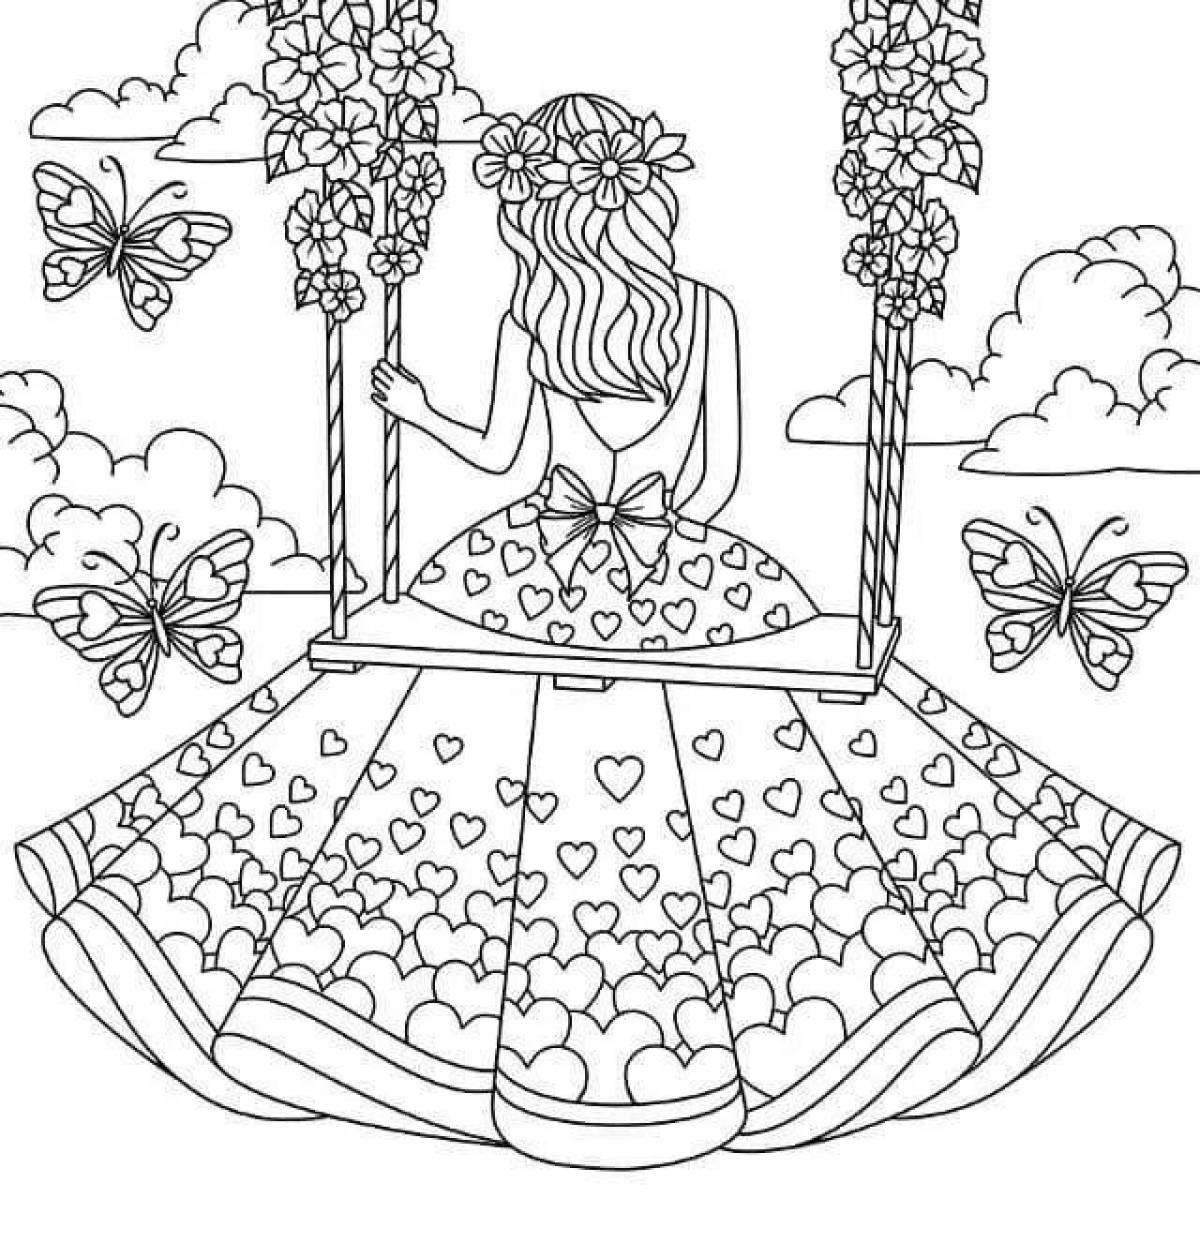 Sparkling coloring pages 8-9 years old for girls